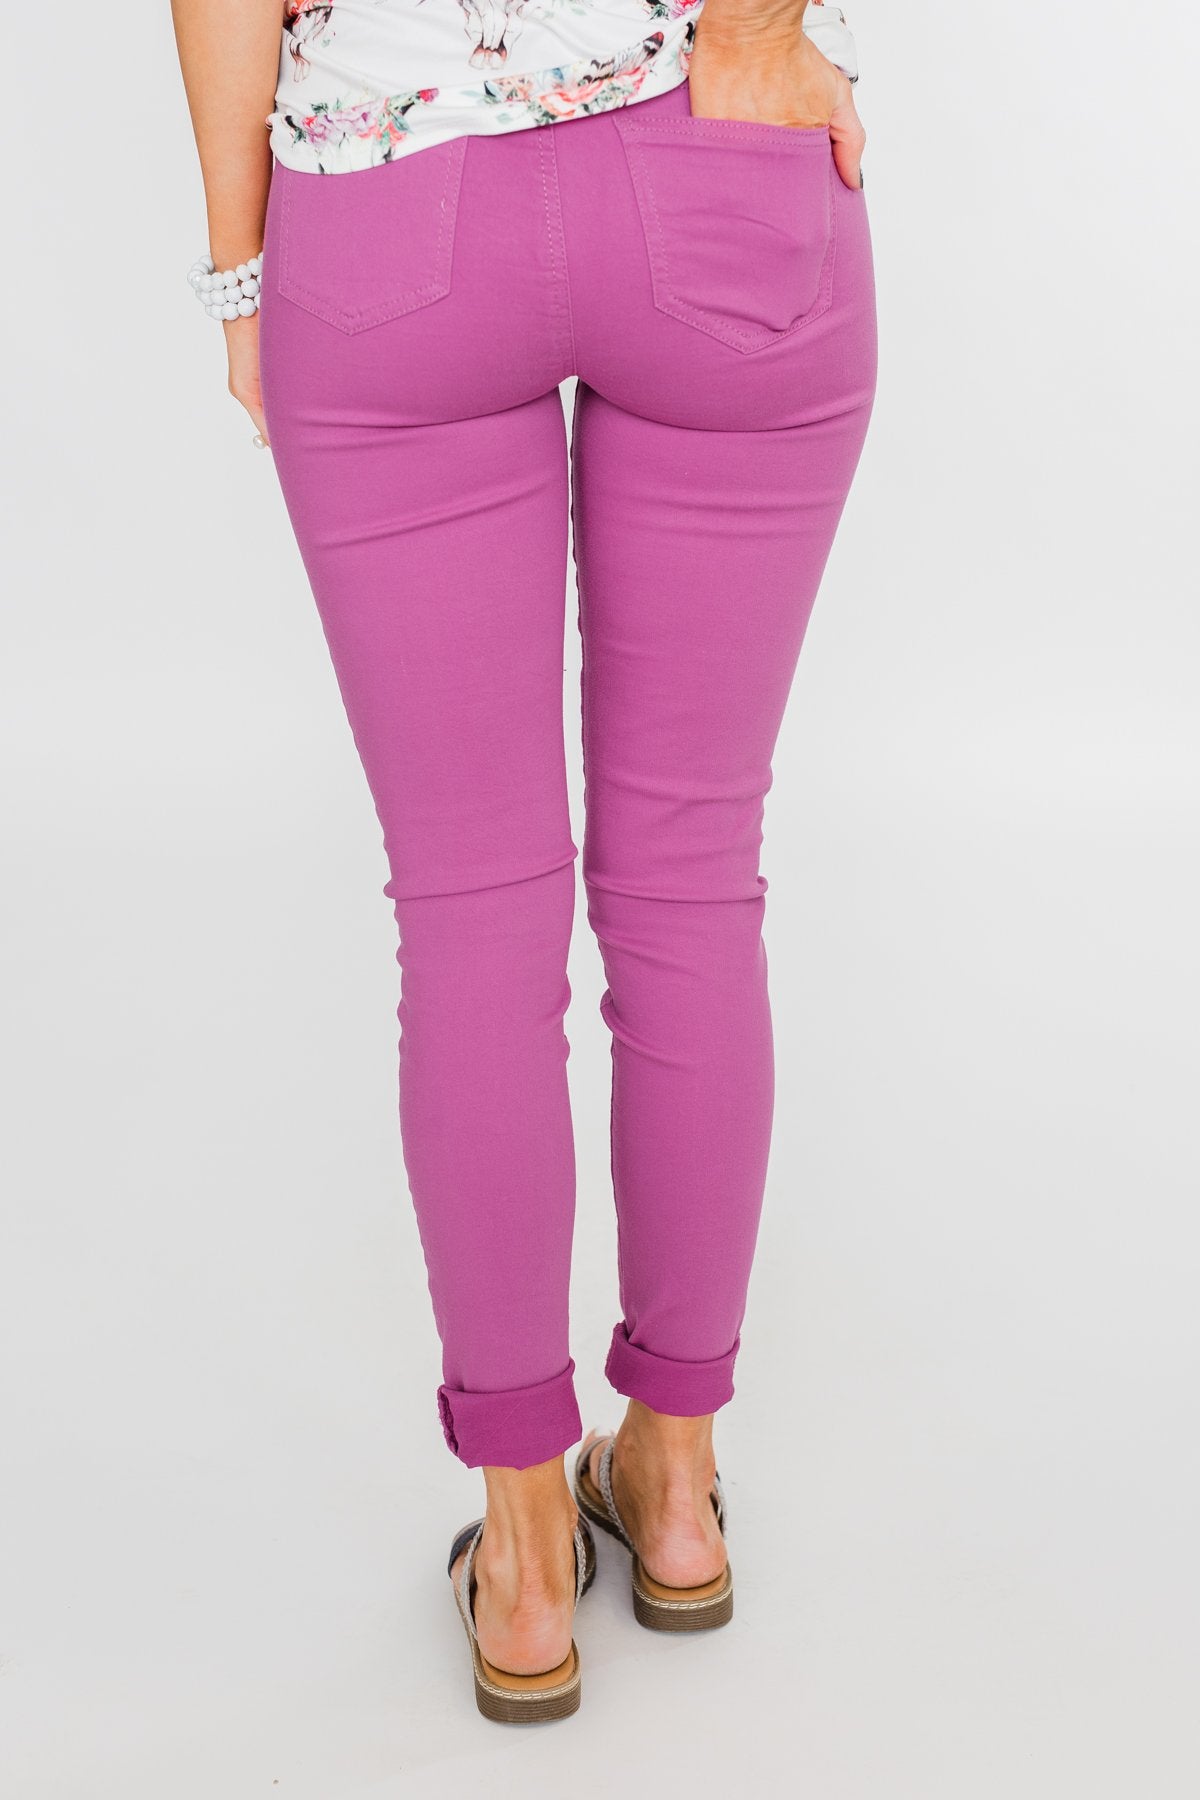 High Waisted Hot Pink Color Skinny Jeans